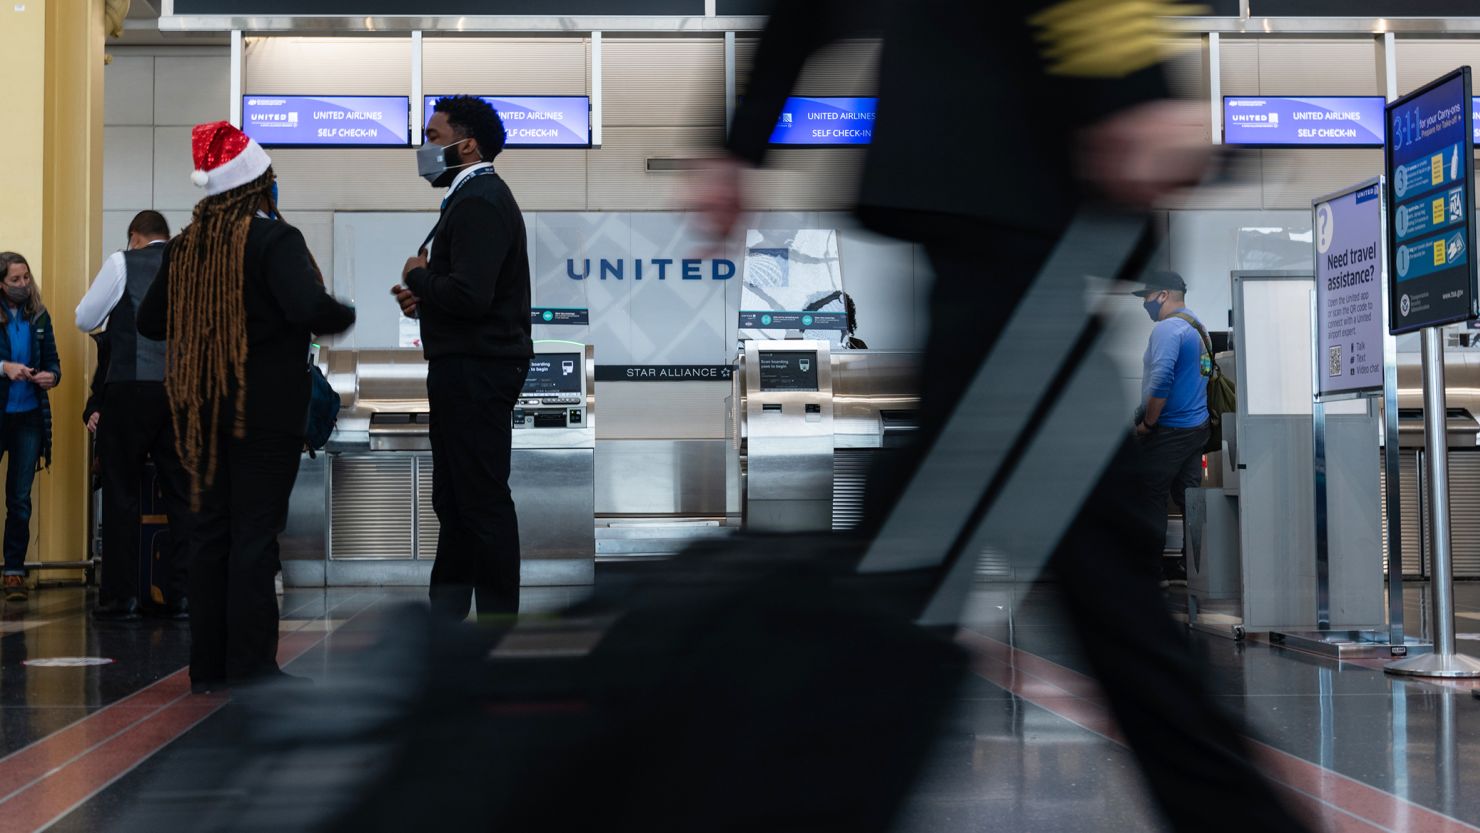 An airline crew member rolls their bag past the United Airlines ticket counter at Reagan National Airport in Arlington, Virginia, U.S., on Friday, Dec. 24, 2021. Air carriers scrapped more than 800 U.S. flights for the holiday weekend, led by United Airlines and Delta Air Lines, as surging Covid infections and the prospects of bad weather disrupted Christmas travel. Photographer: Eric Lee/Bloomberg via Getty Images